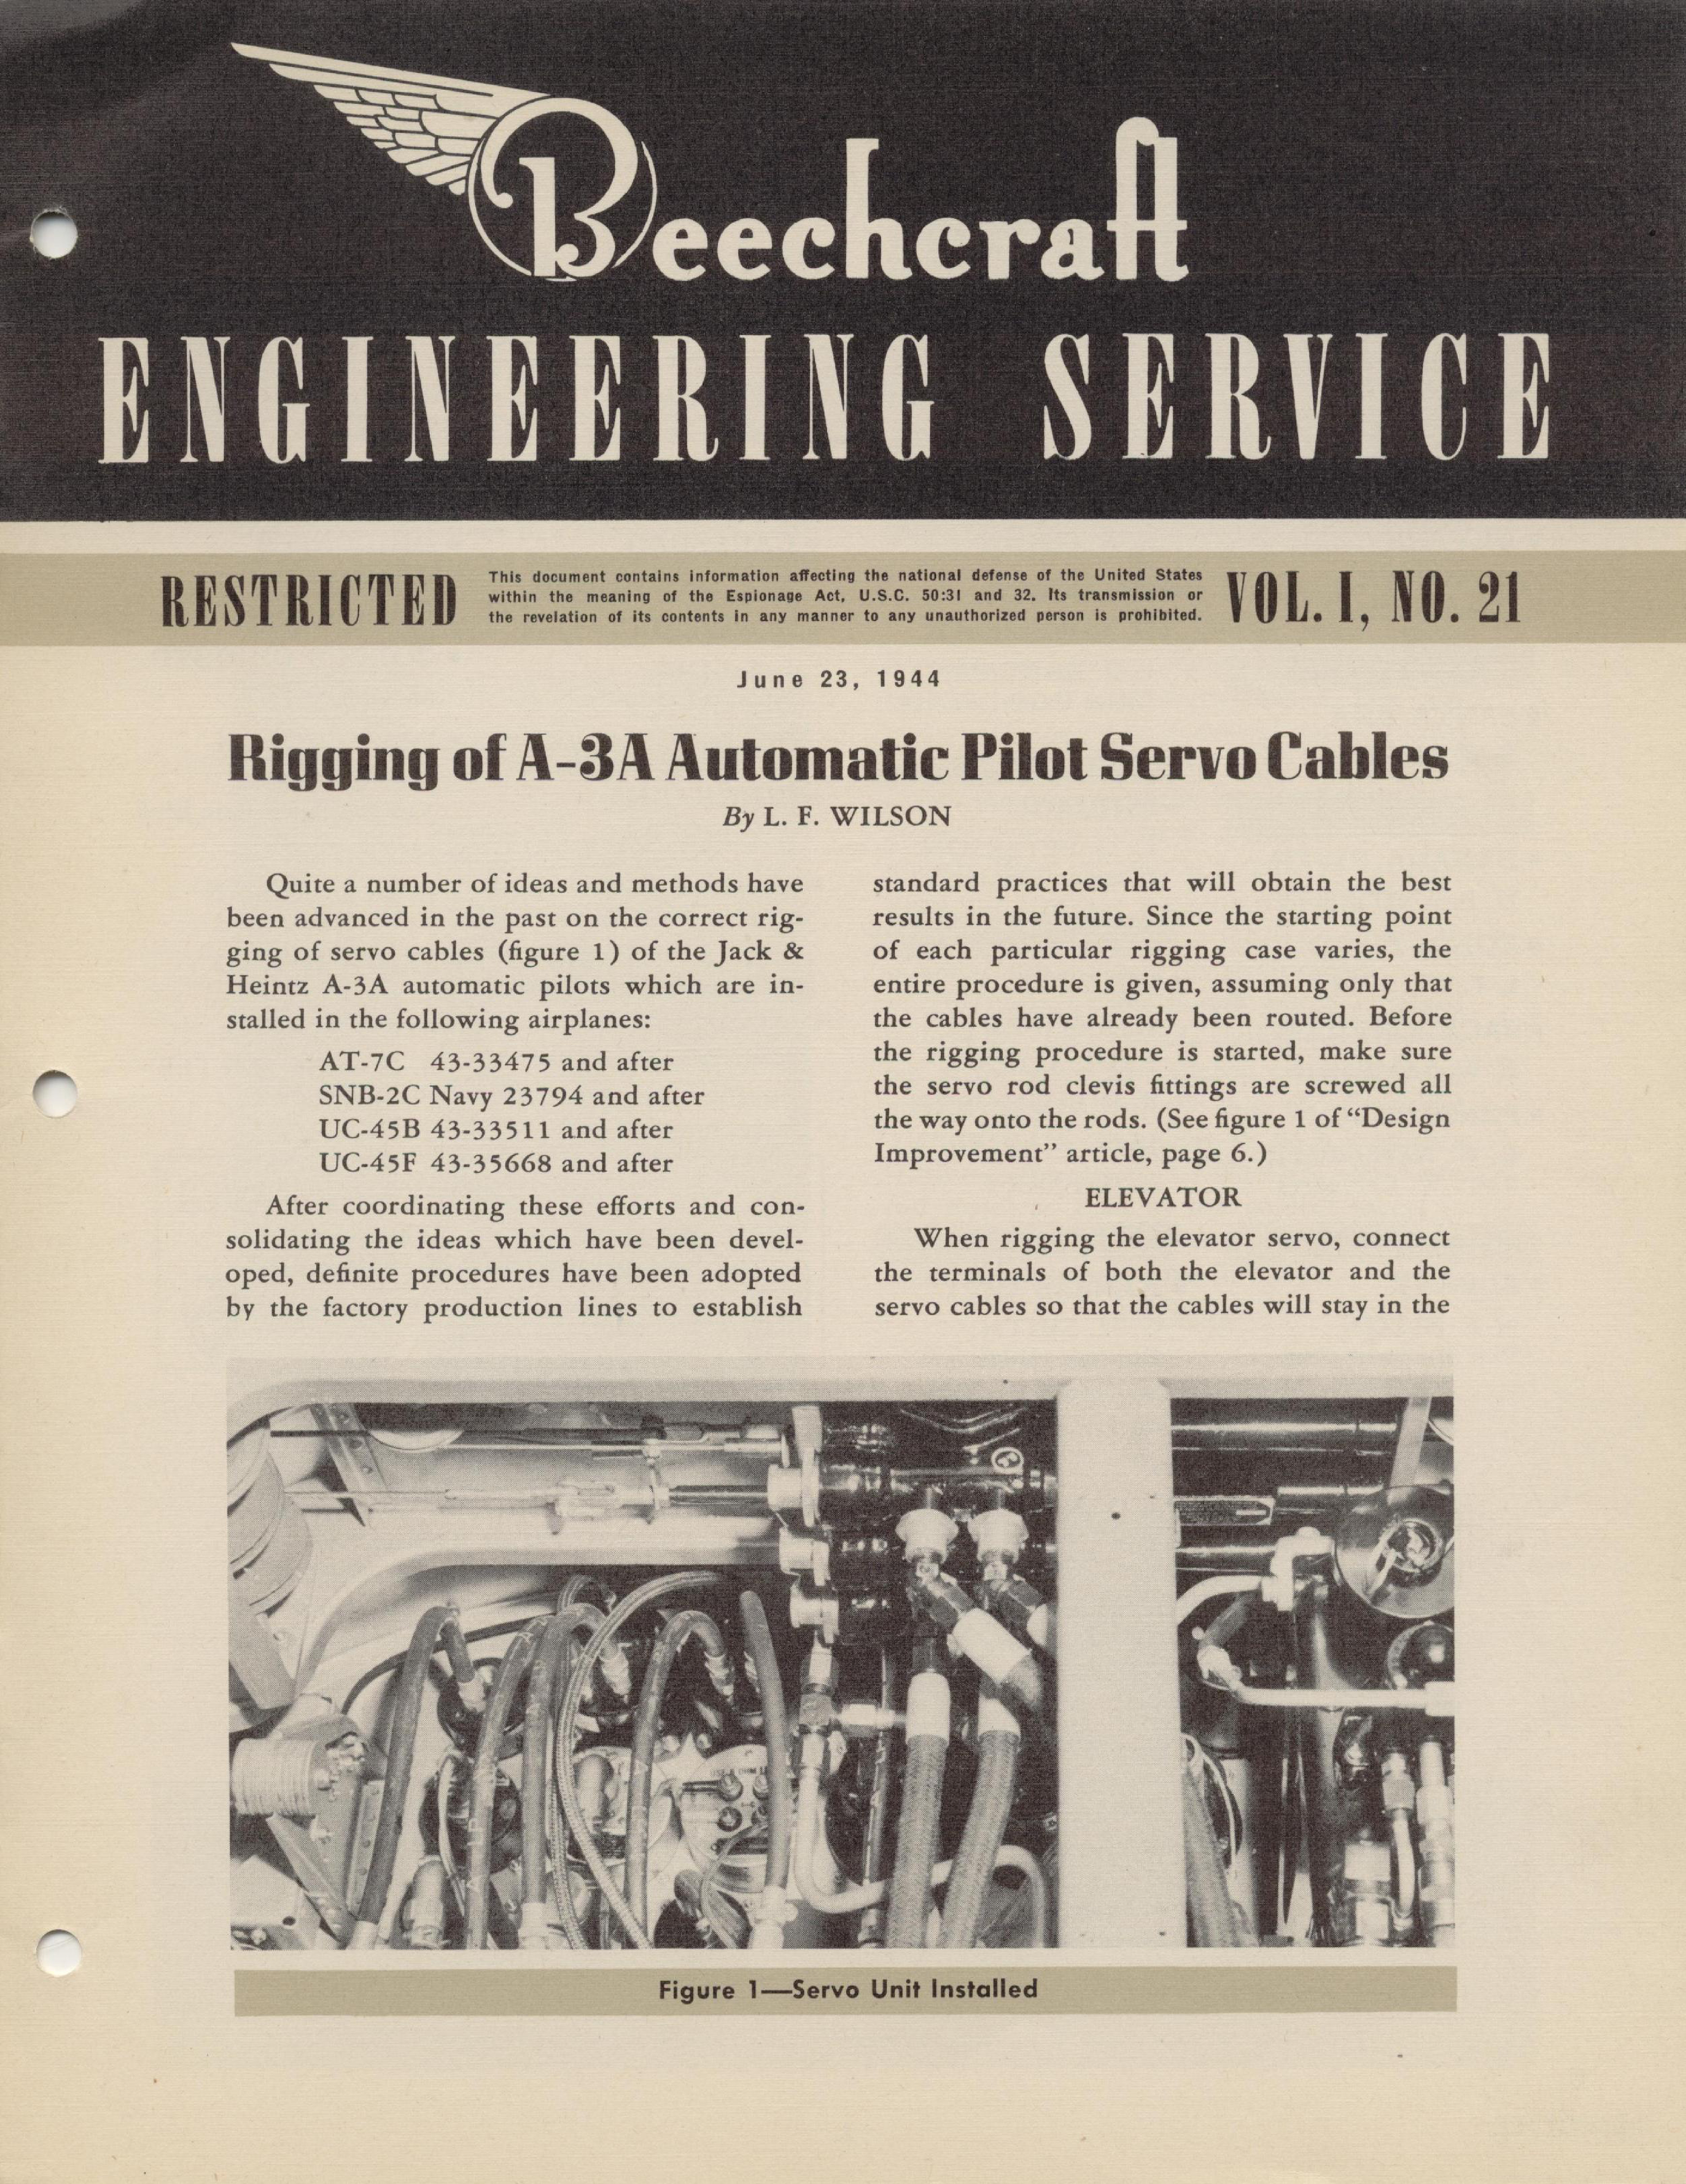 Sample page 1 from AirCorps Library document: Vol. I, No. 21 - Beechcraft Engineering Service